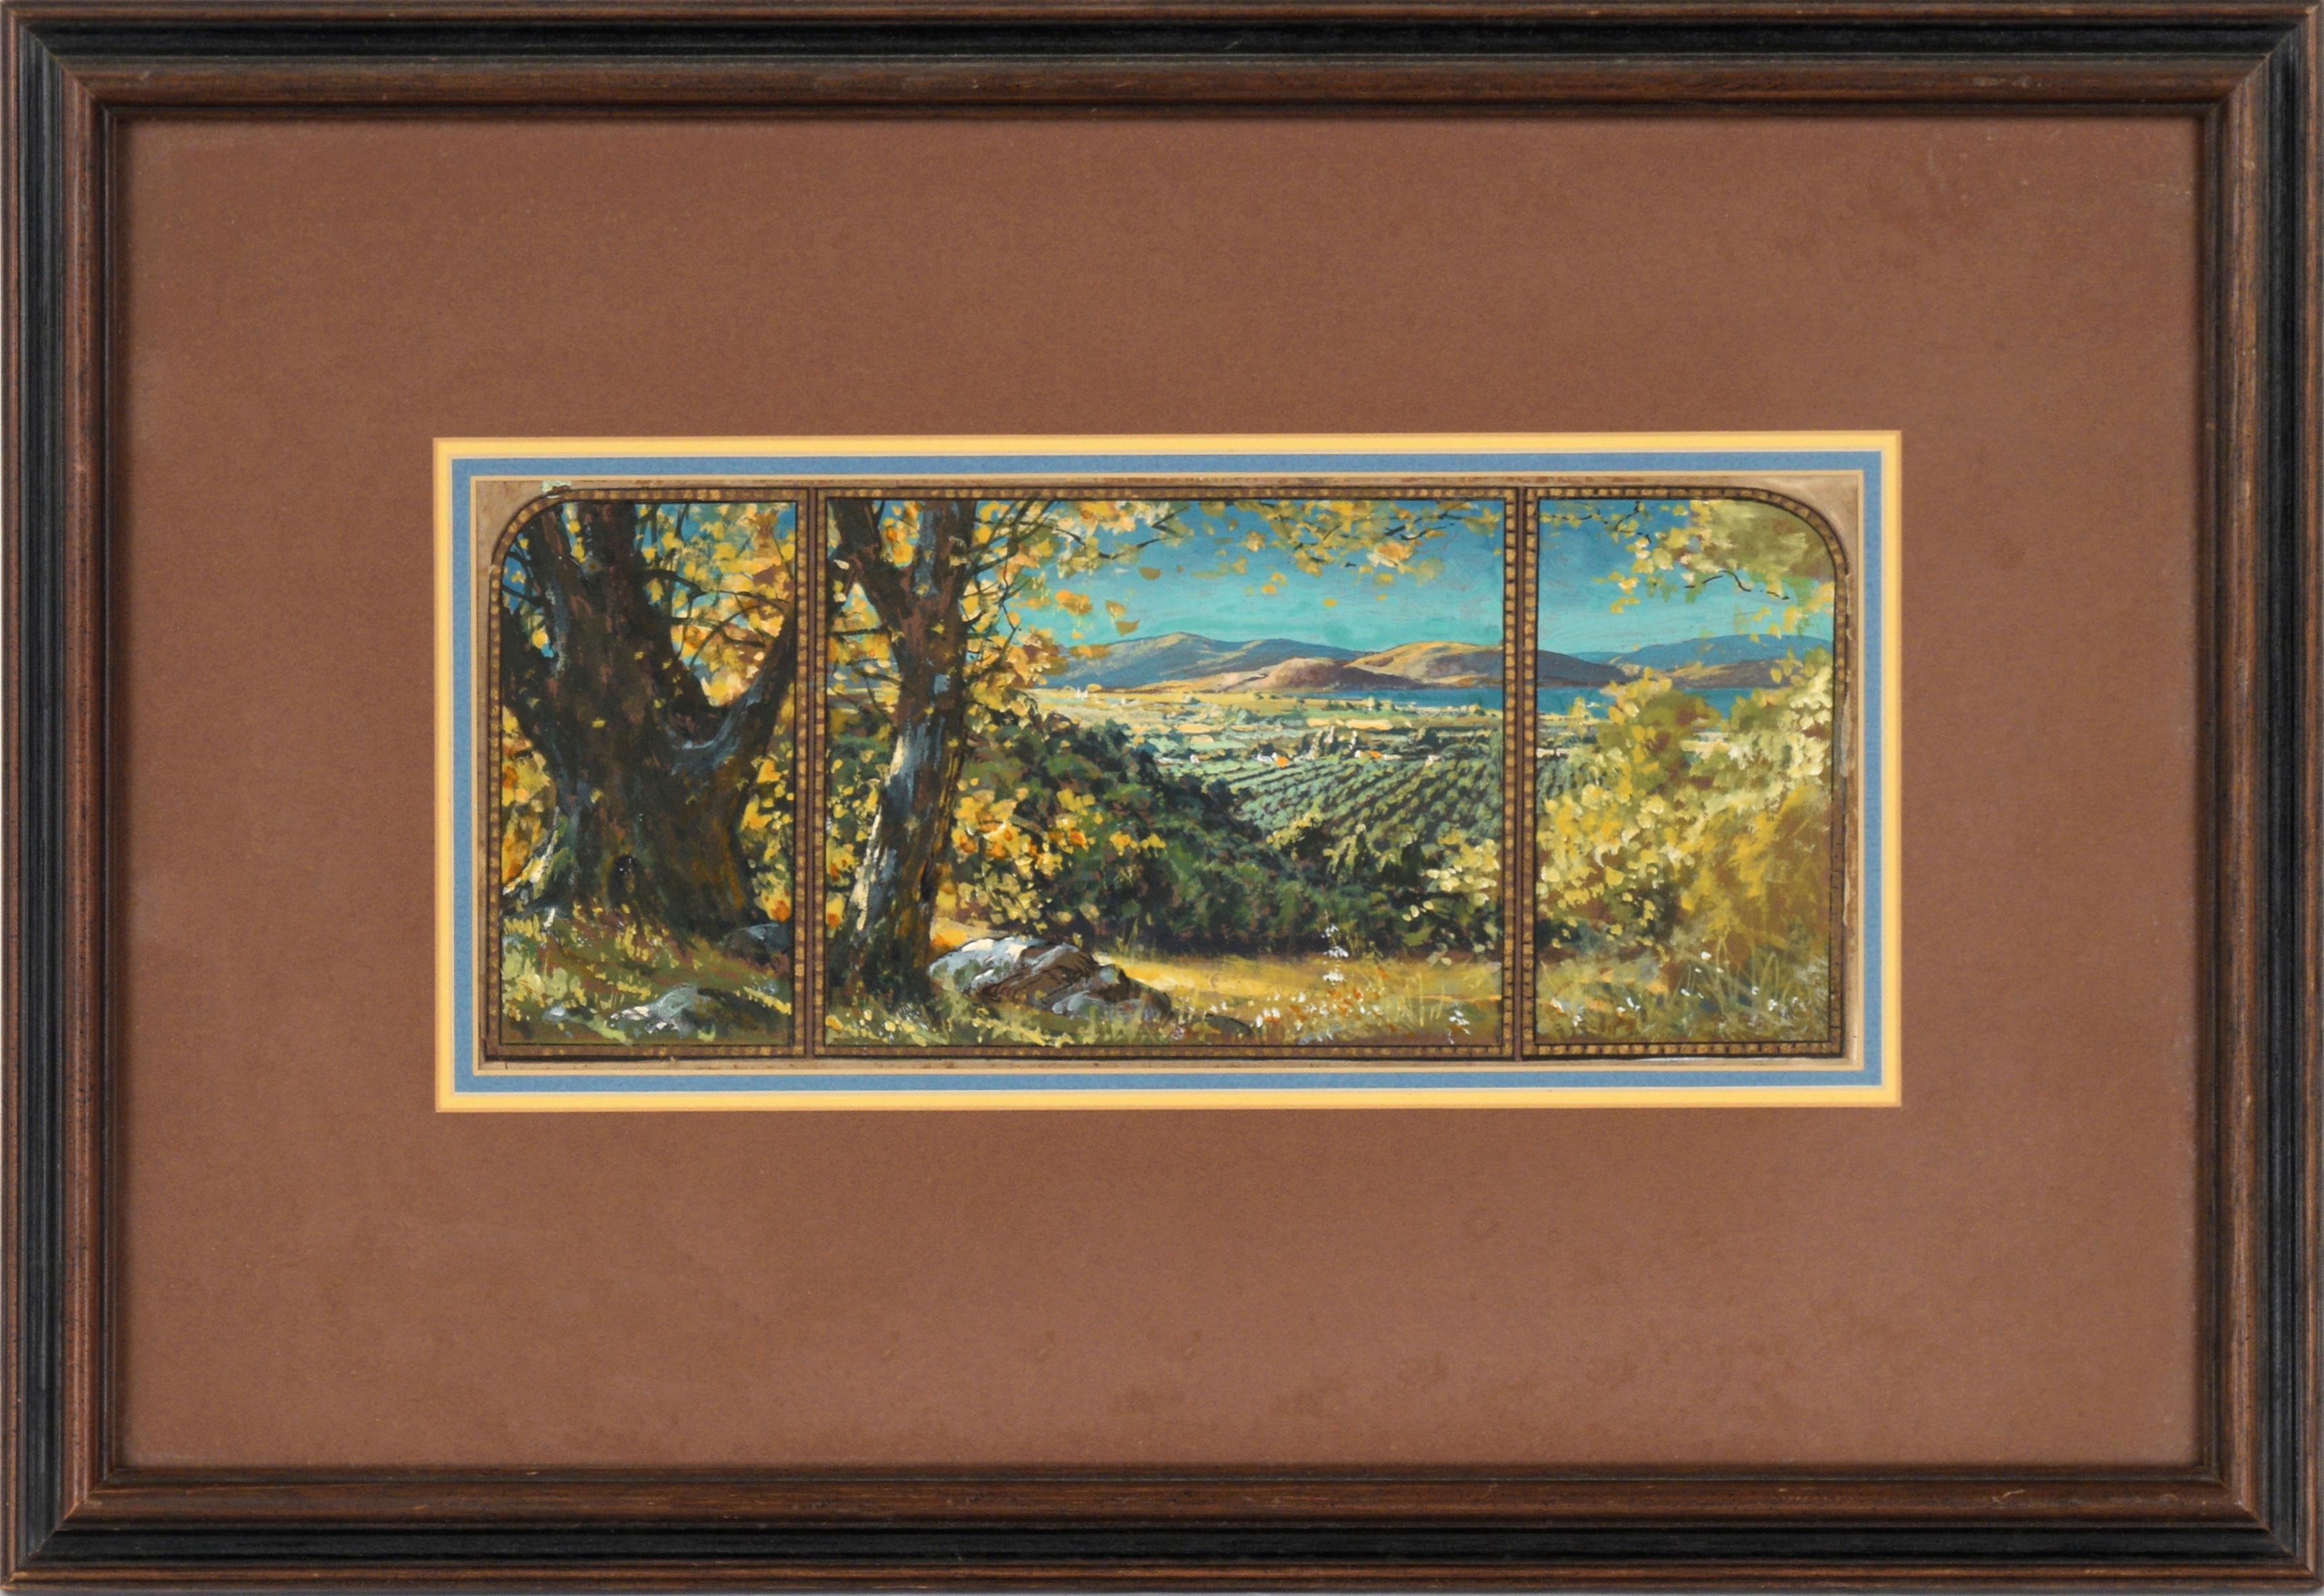 California School Landscape Painting - Looking Out Over the Vineyards, Early 20th Century Landscape Panorama 